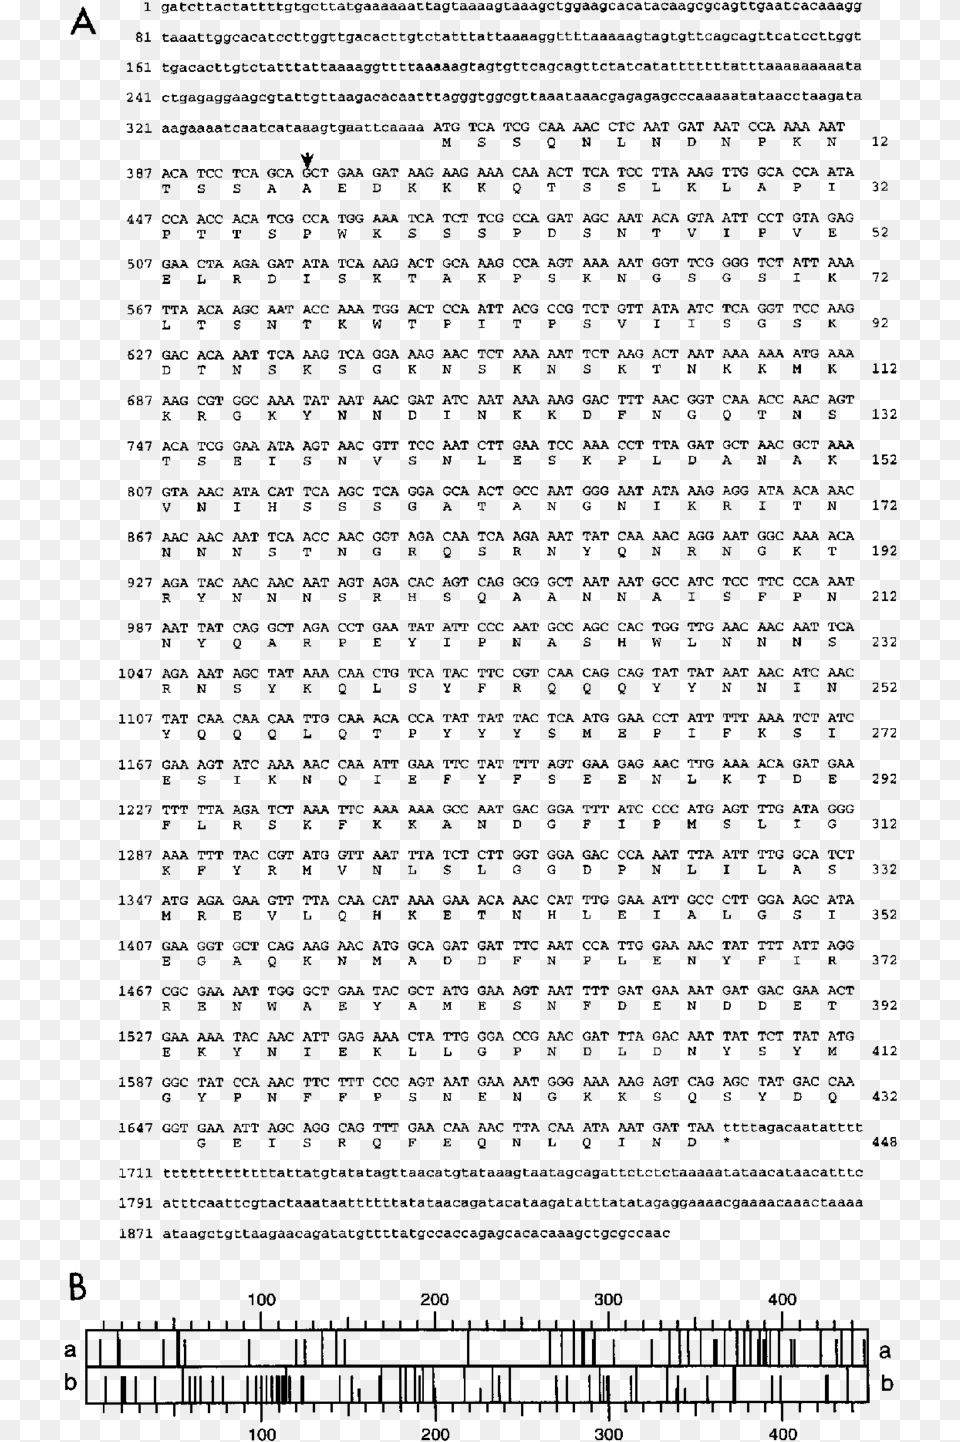 A Nucleotide Sequence Of Slf1 And Deduced Amino Acid Sequence, Gray Png Image